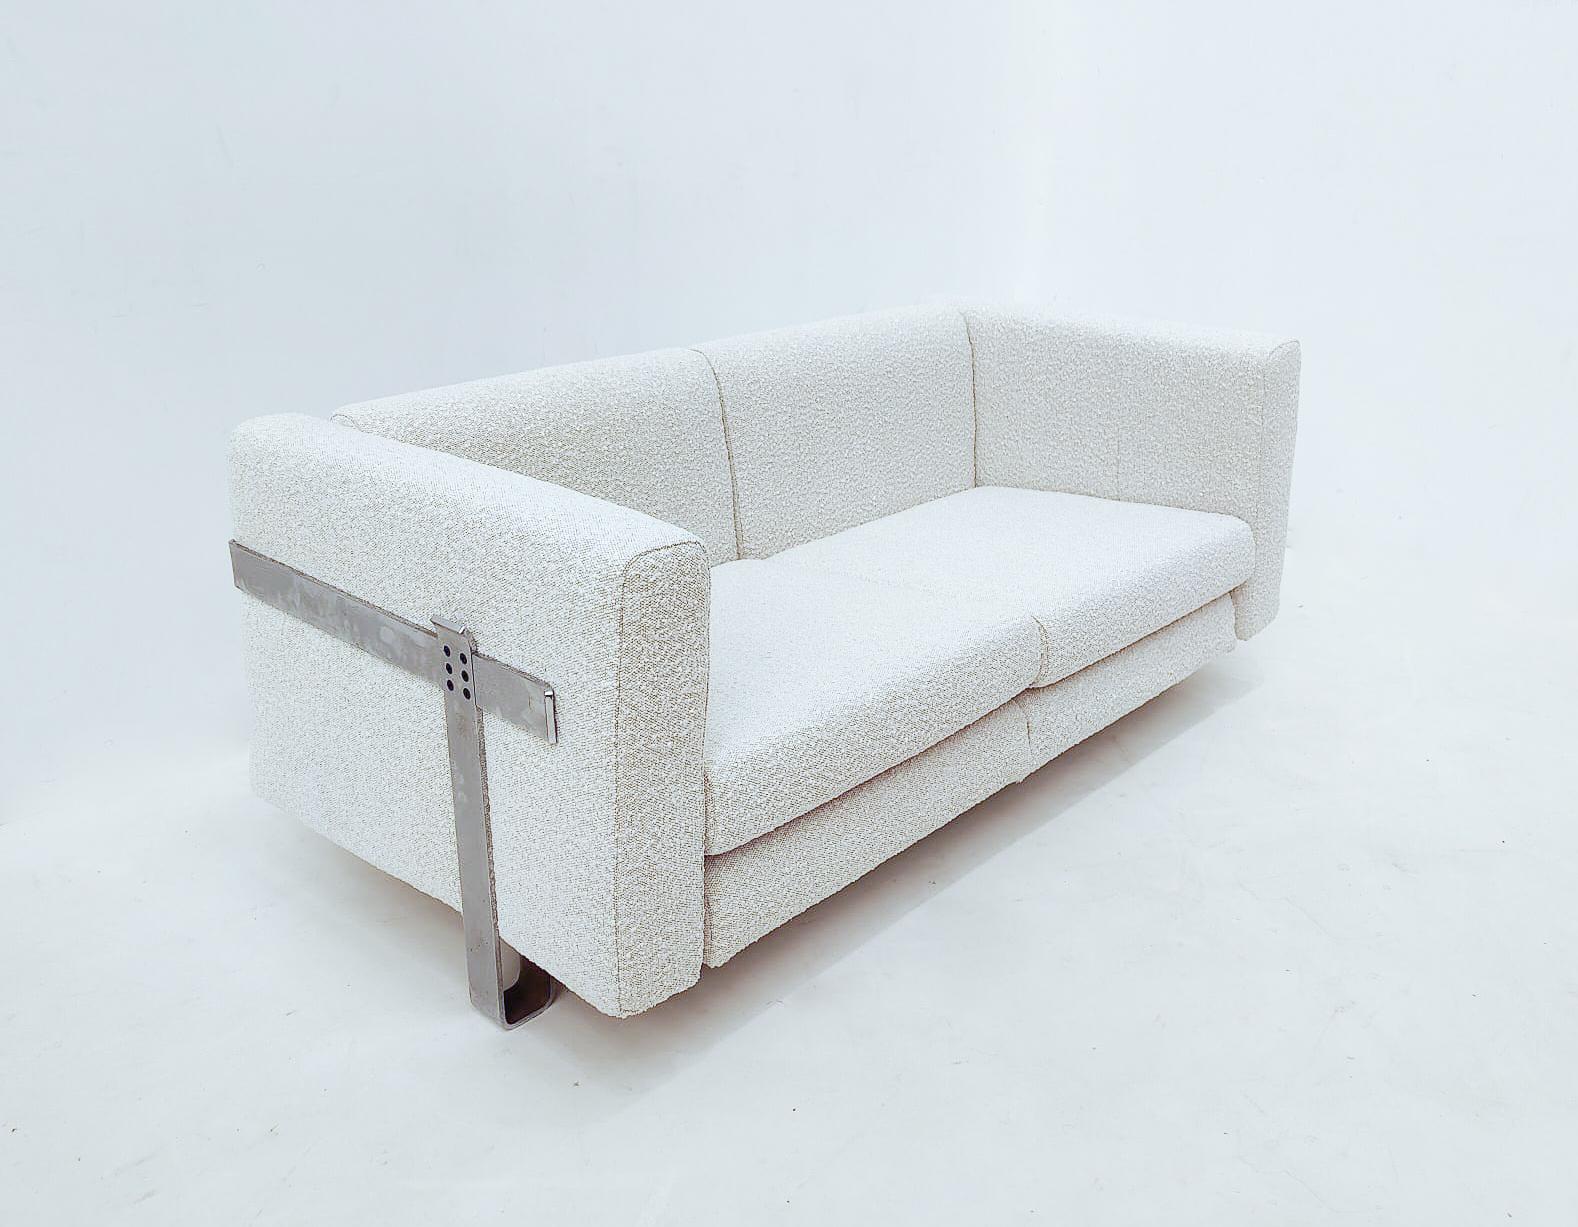 Mid-Century Modern sofa by Luigi Caccia Dominioni for Azucena, Chrome and Boucle Fabric, 1960s.
New Upholstery.